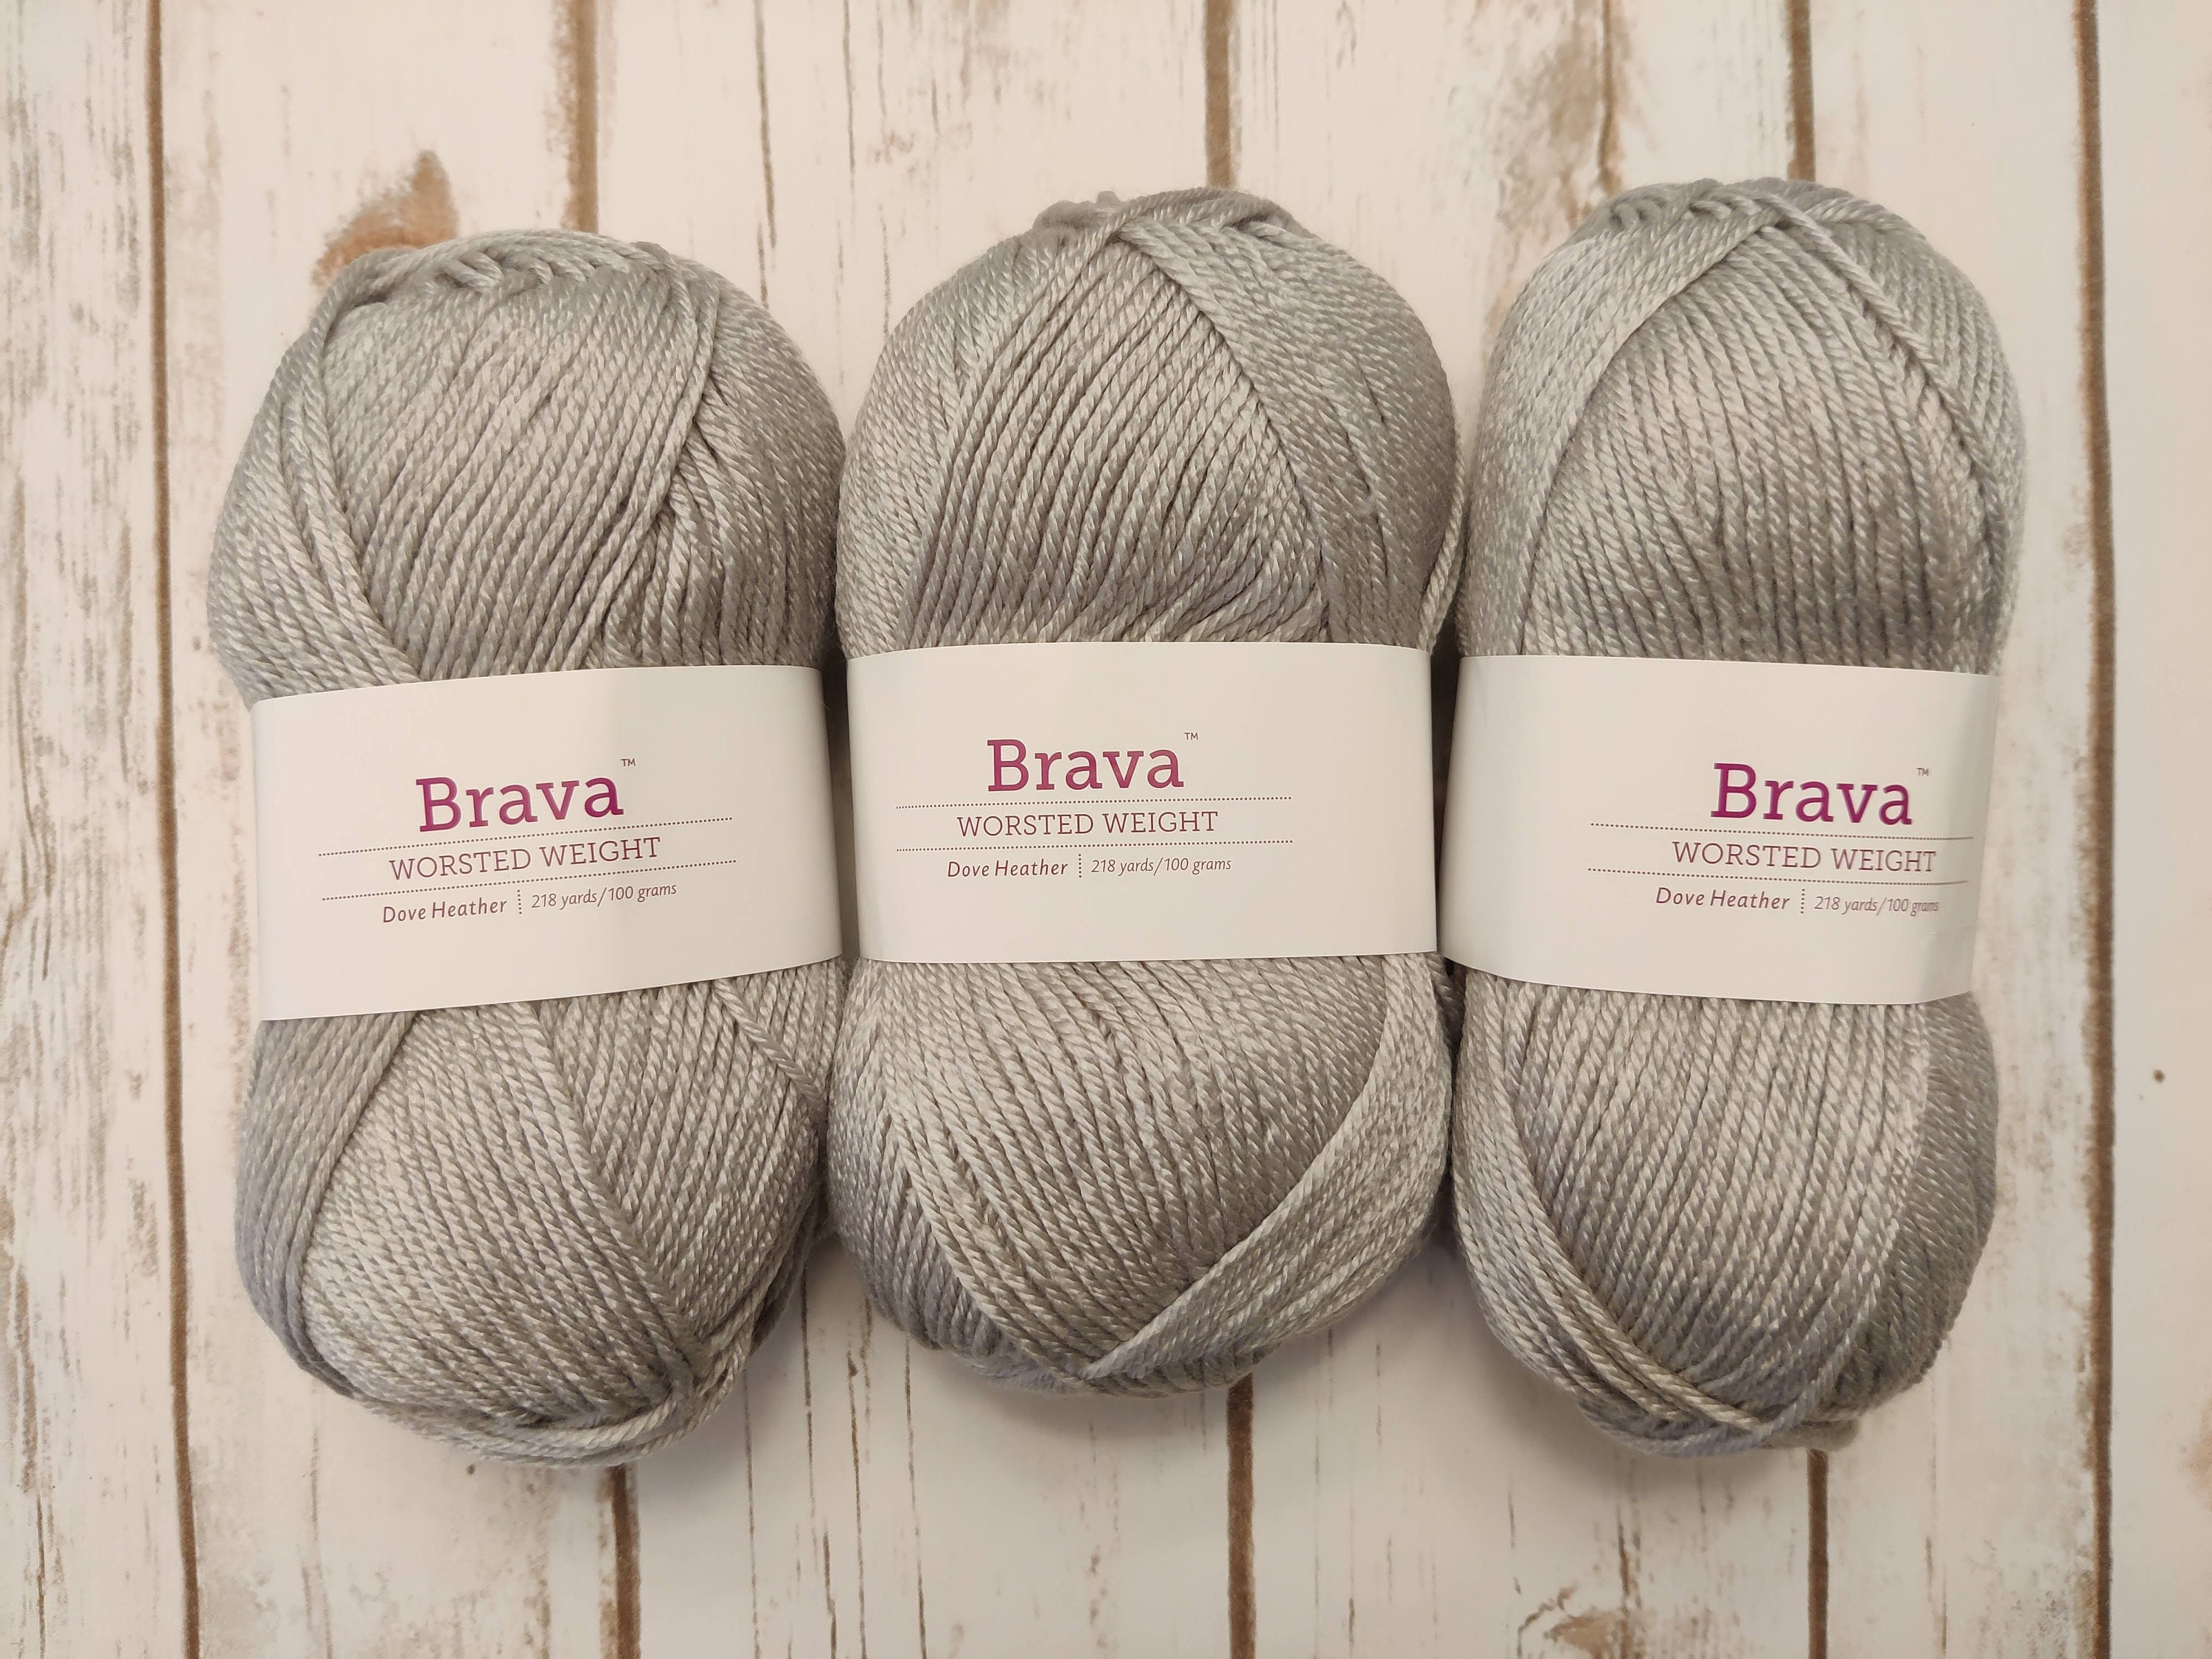 Brava Worsted Weight Yarn Review